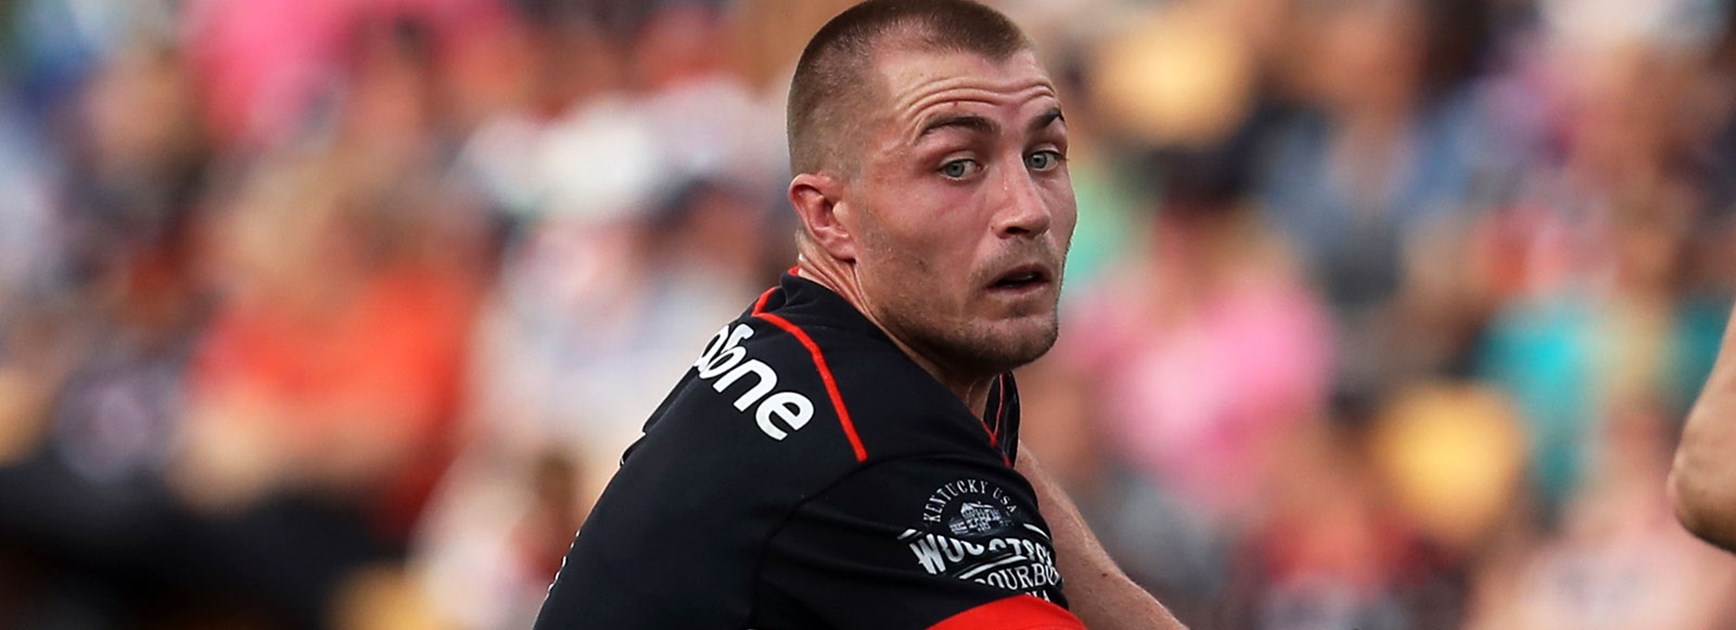 Kieran Foran made his Warriors debut against the Titans in Round 5.